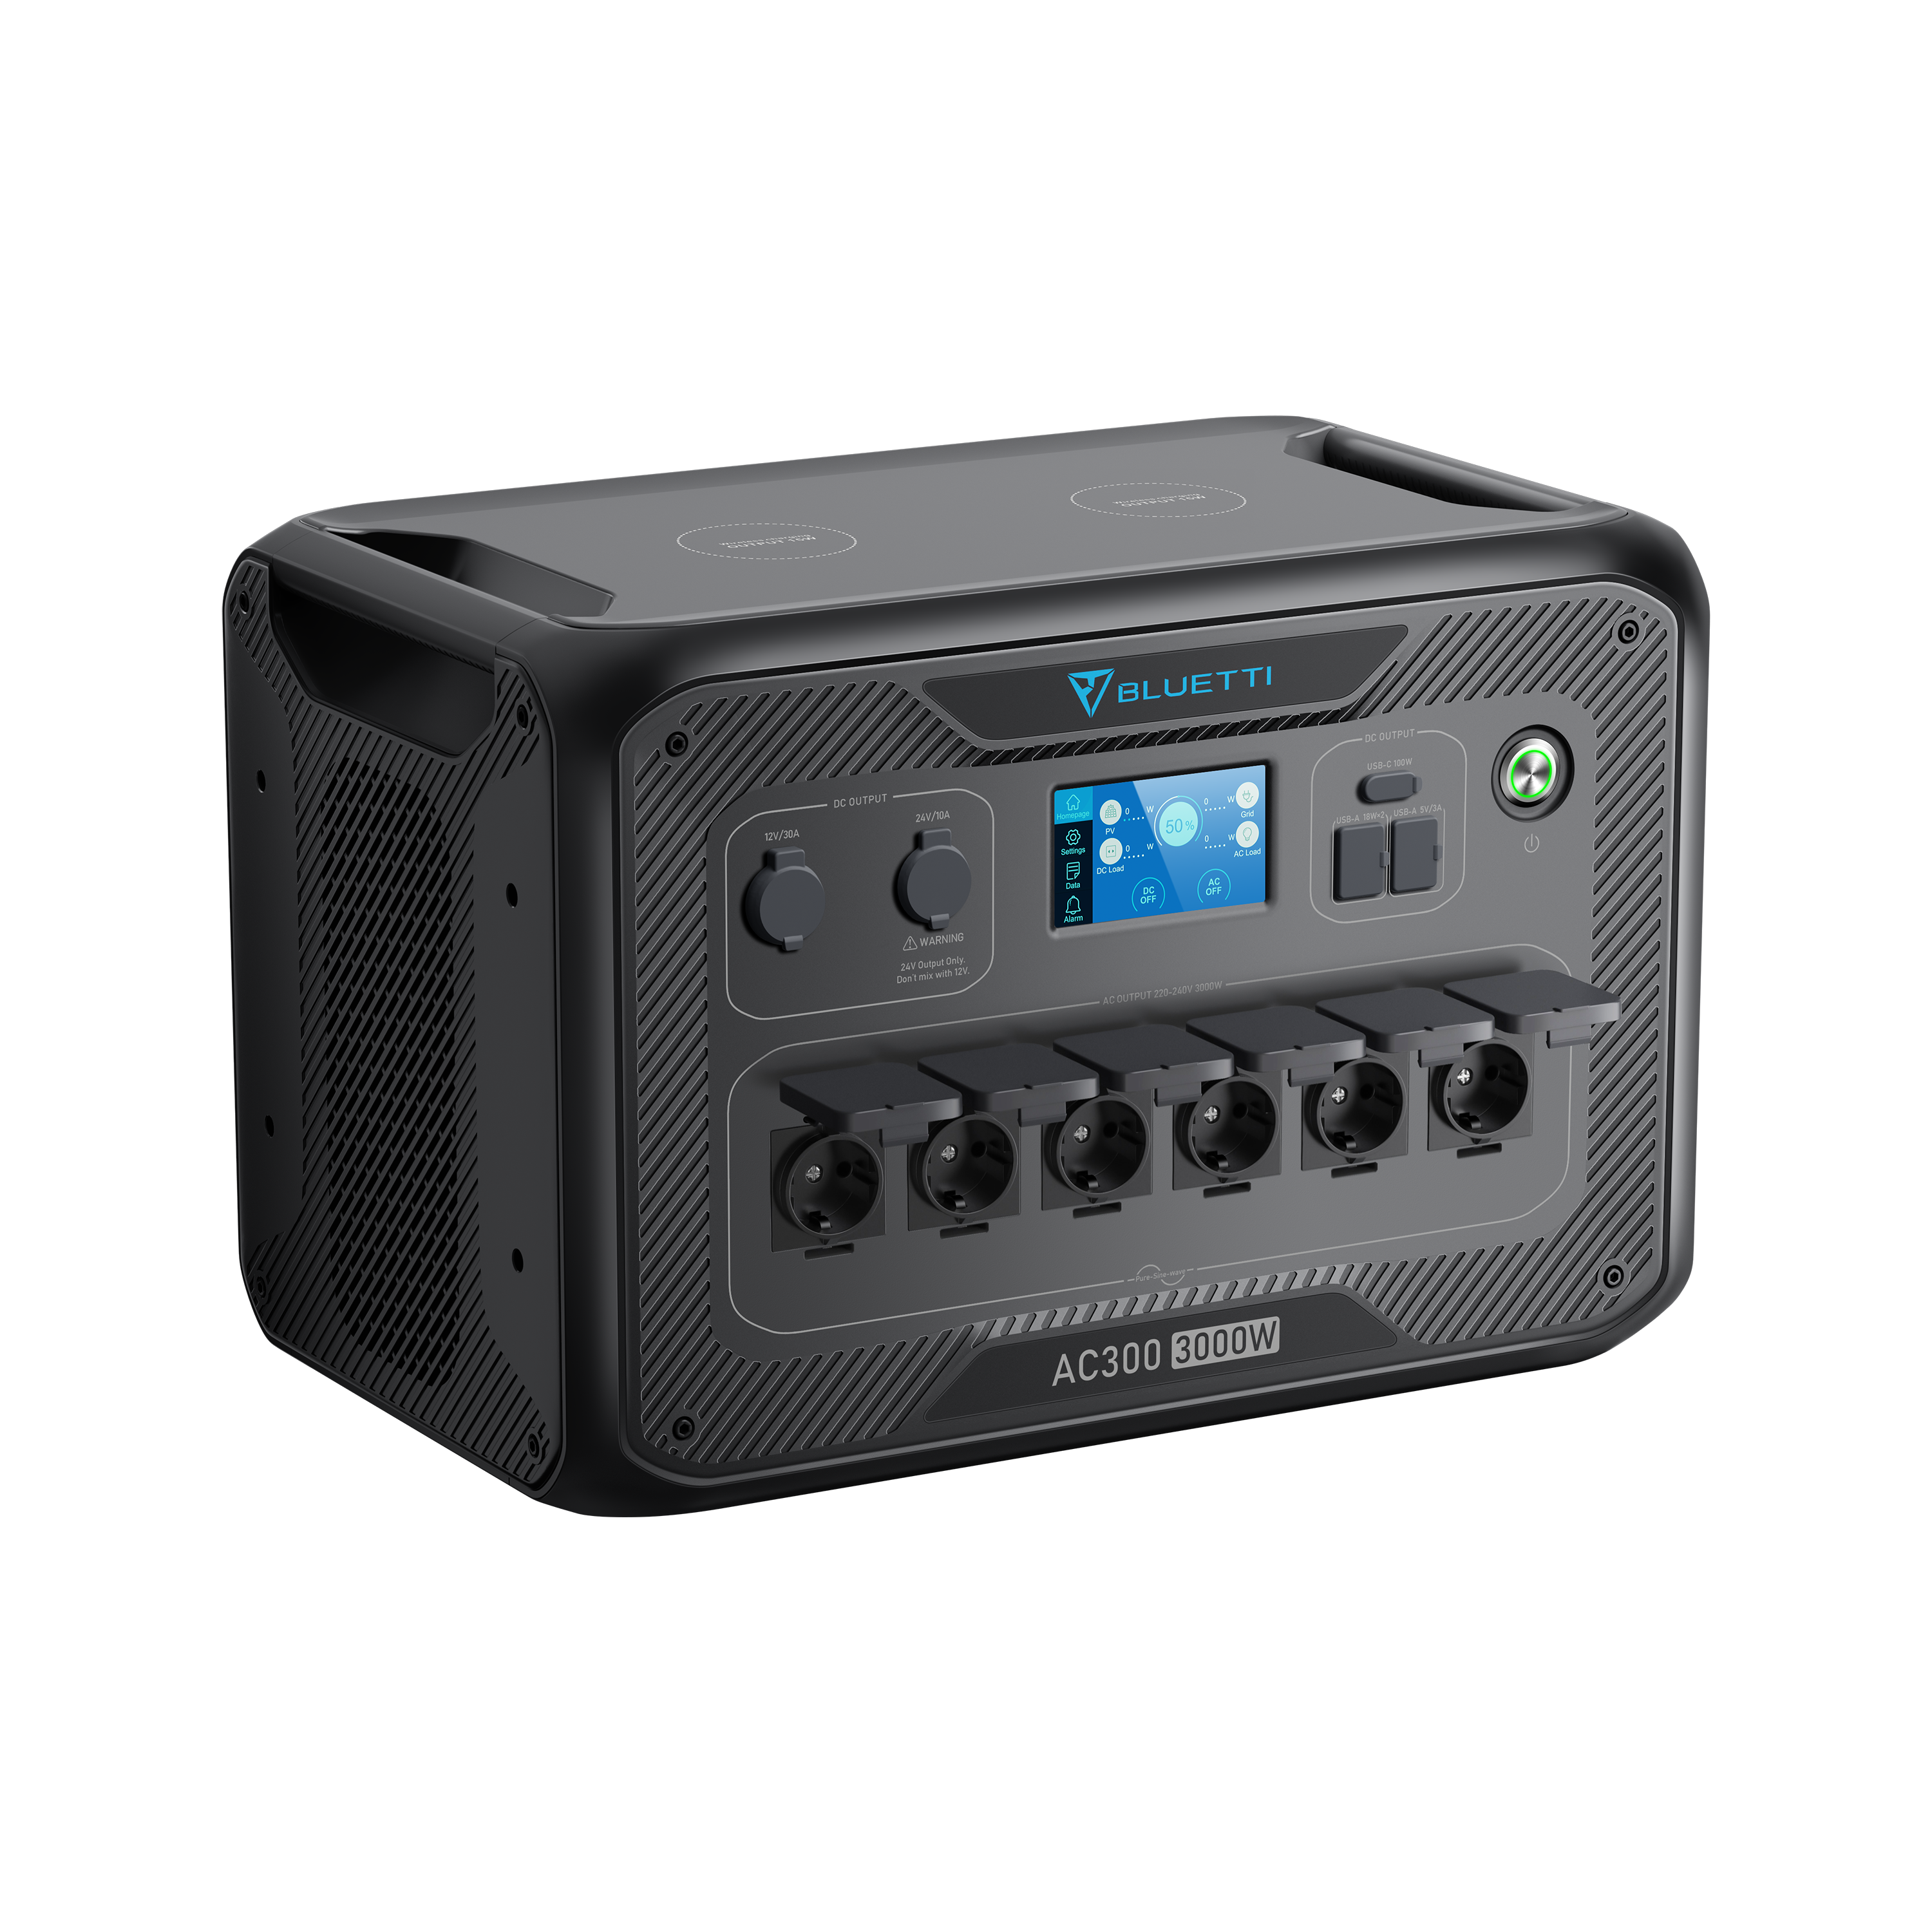 Bluetti AC300 + B300 up to 12,228Wh - huge power station for home and other purposes